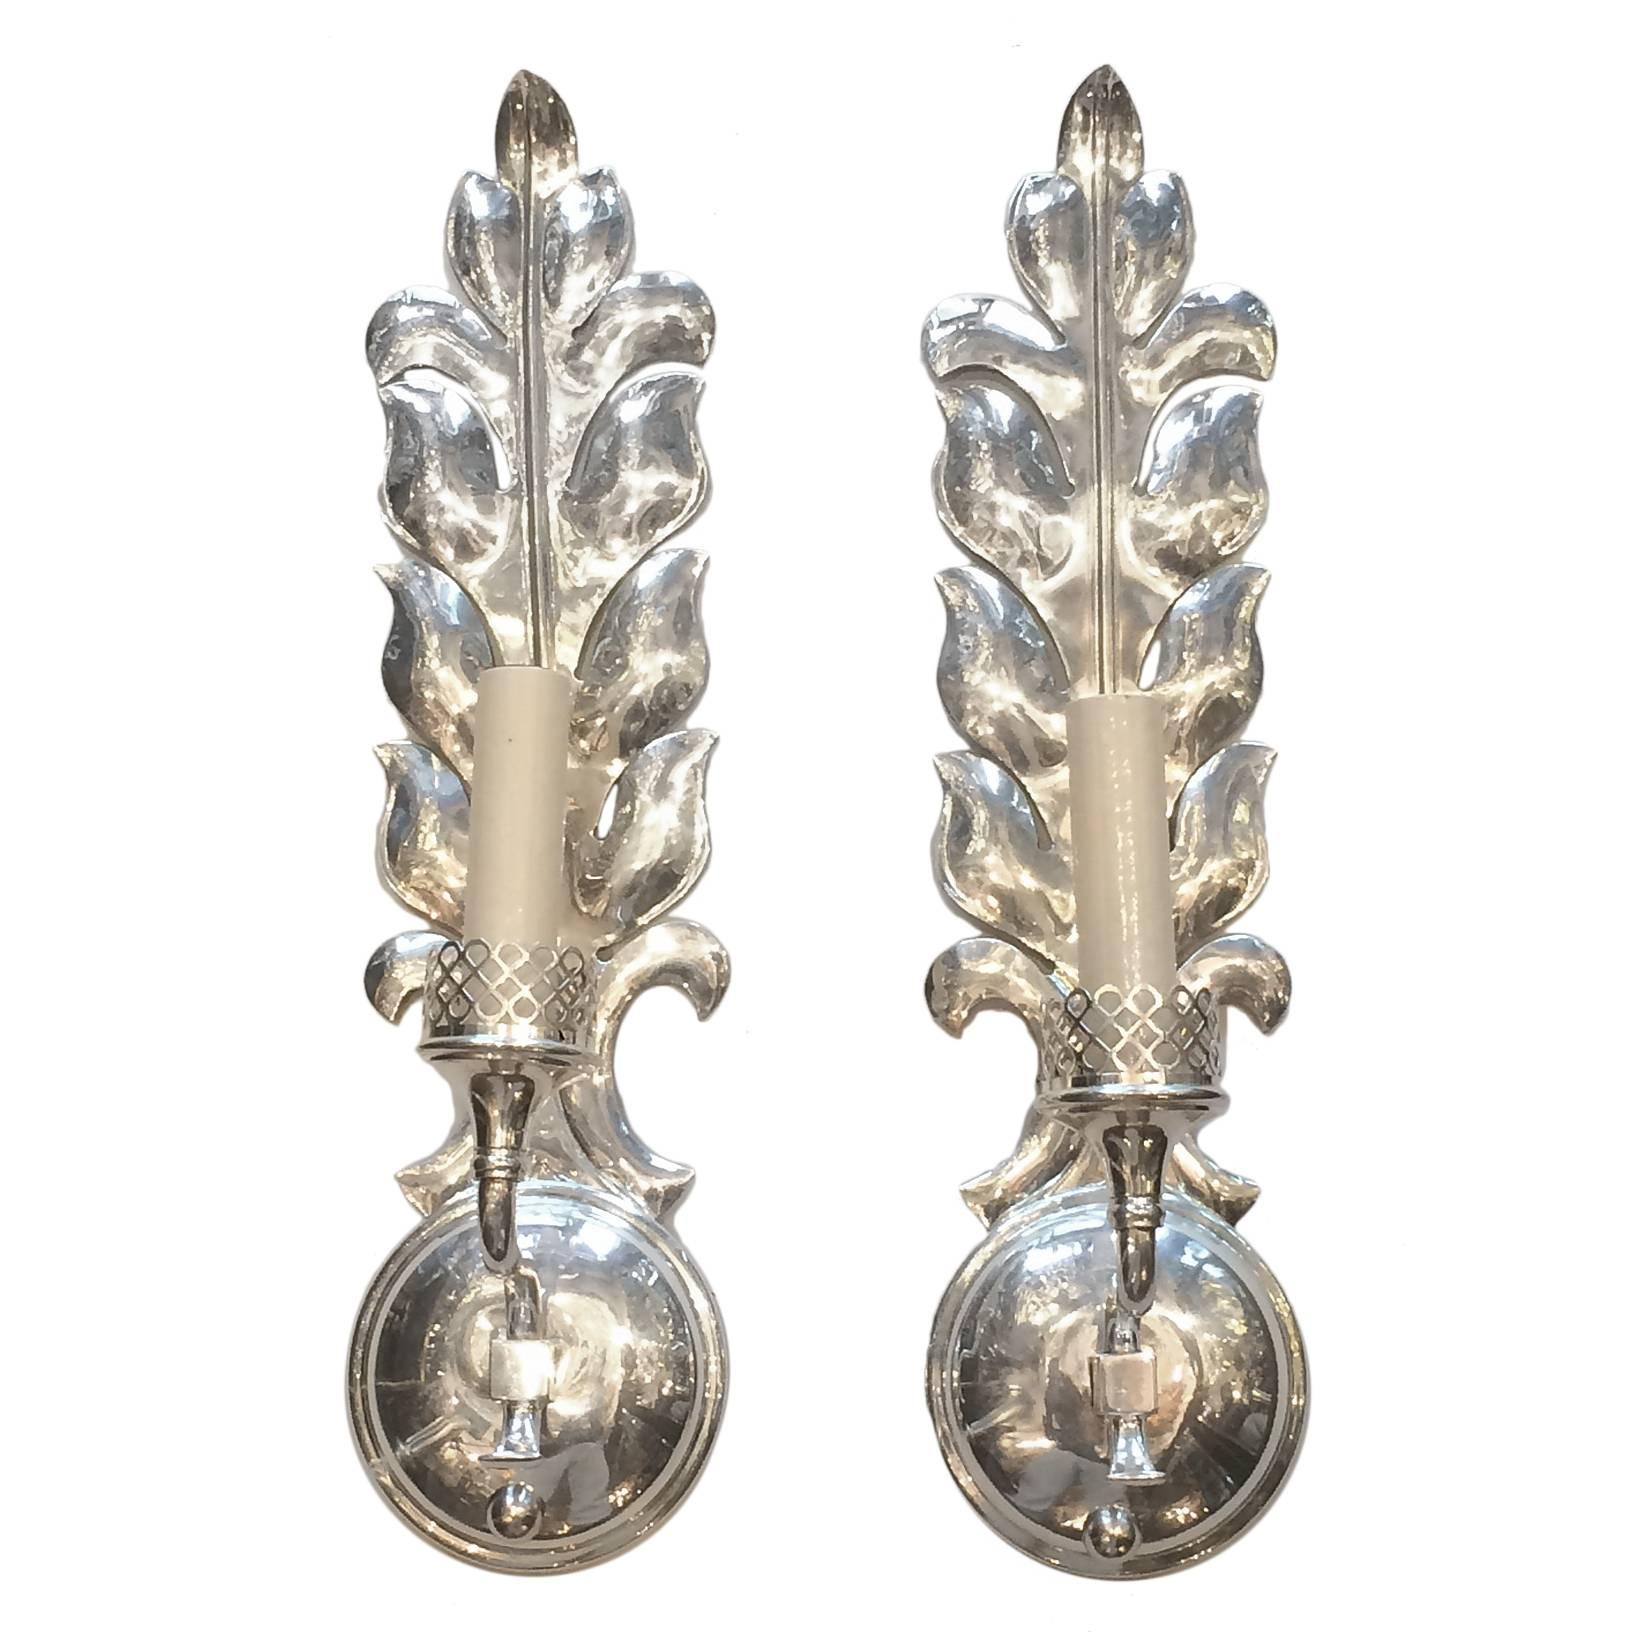 Set of Silver Plated Sconces